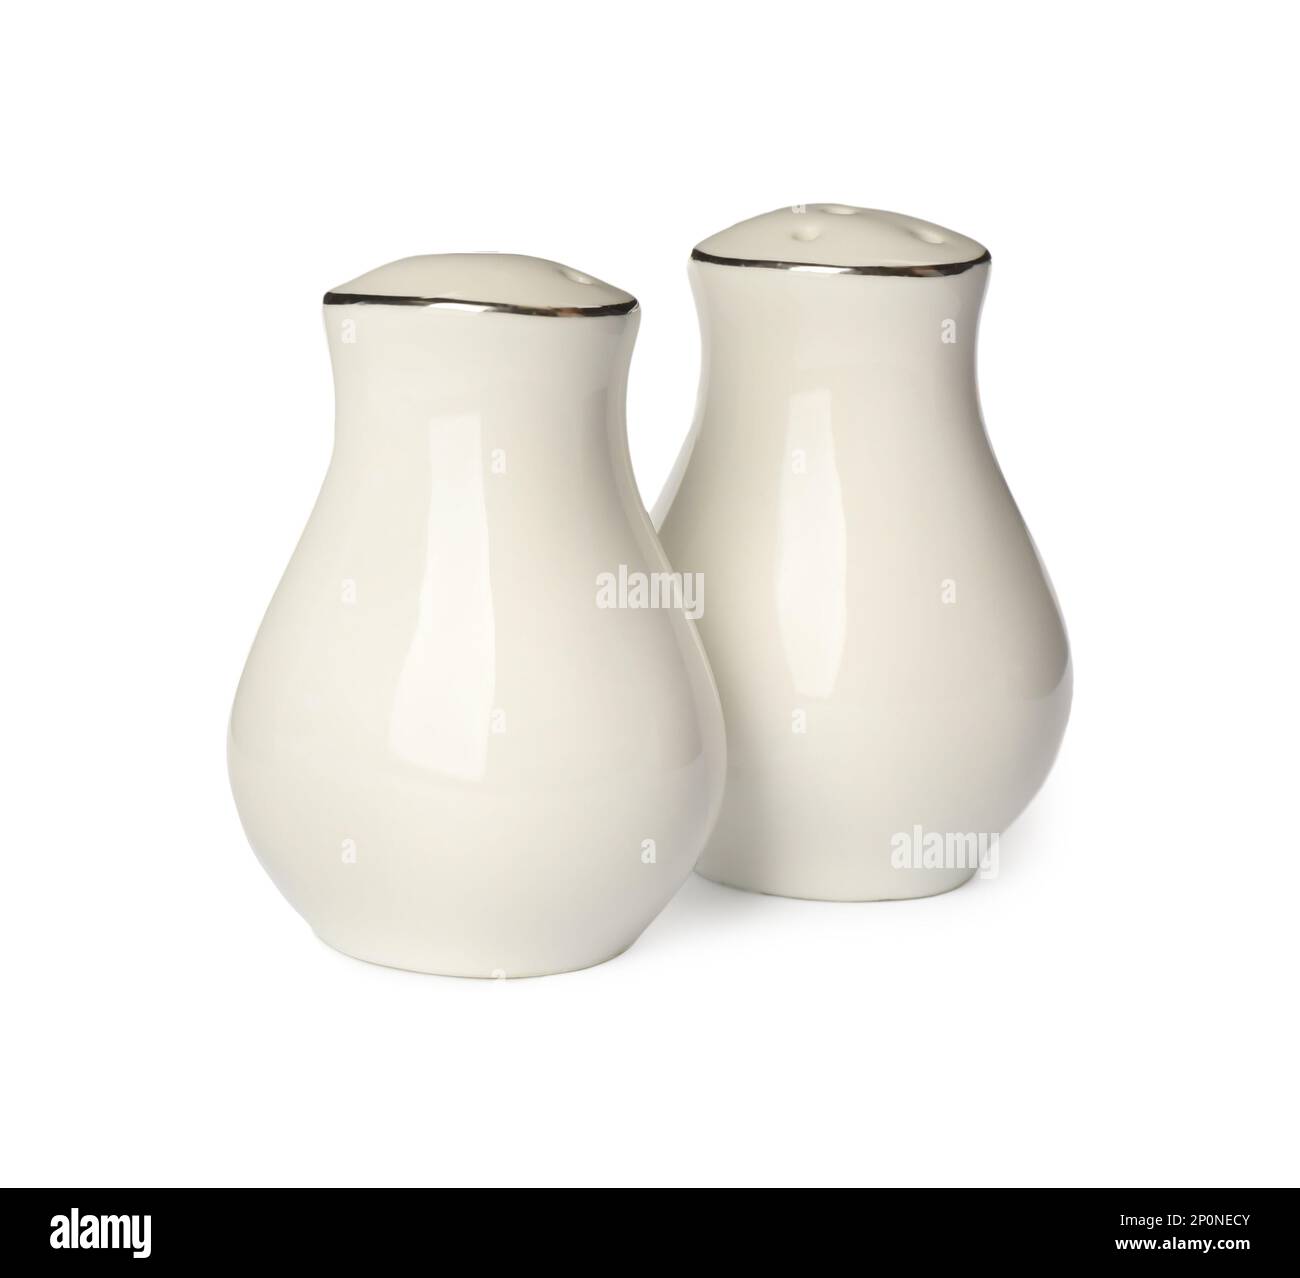 https://c8.alamy.com/comp/2P0NECY/ceramic-salt-and-pepper-shakers-isolated-on-white-2P0NECY.jpg